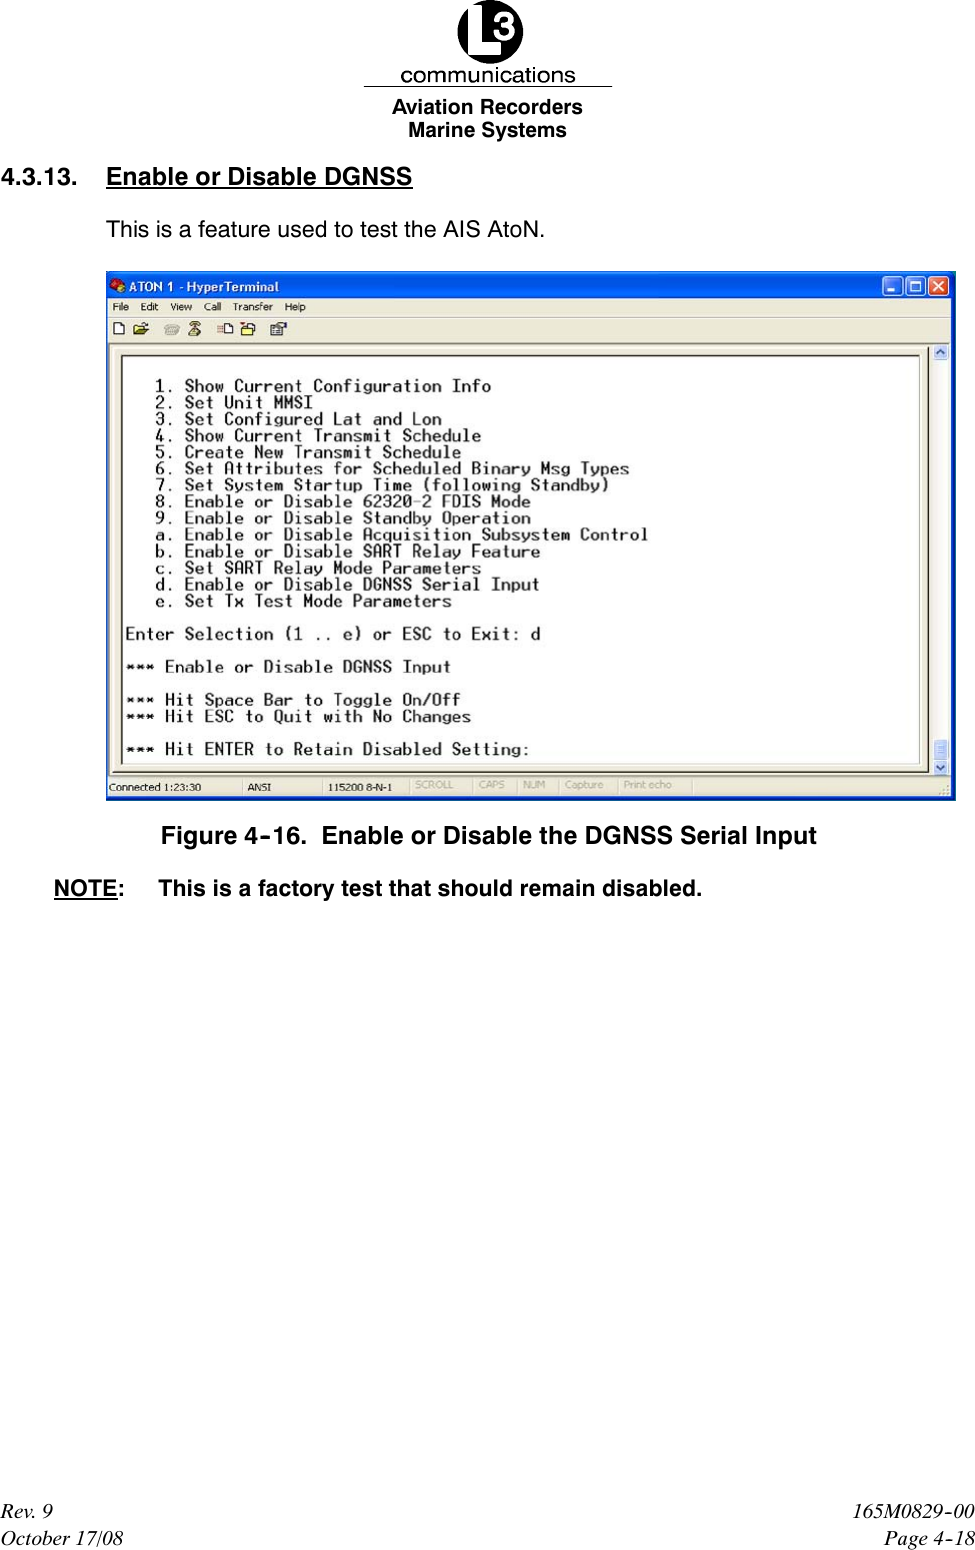 Marine SystemsAviation RecordersPage 4--18165M0829--00Rev. 9October 17/084.3.13. Enable or Disable DGNSSThis is a feature used to test the AIS AtoN.Figure 4--16. Enable or Disable the DGNSS Serial InputNOTE: This is a factory test that should remain disabled.